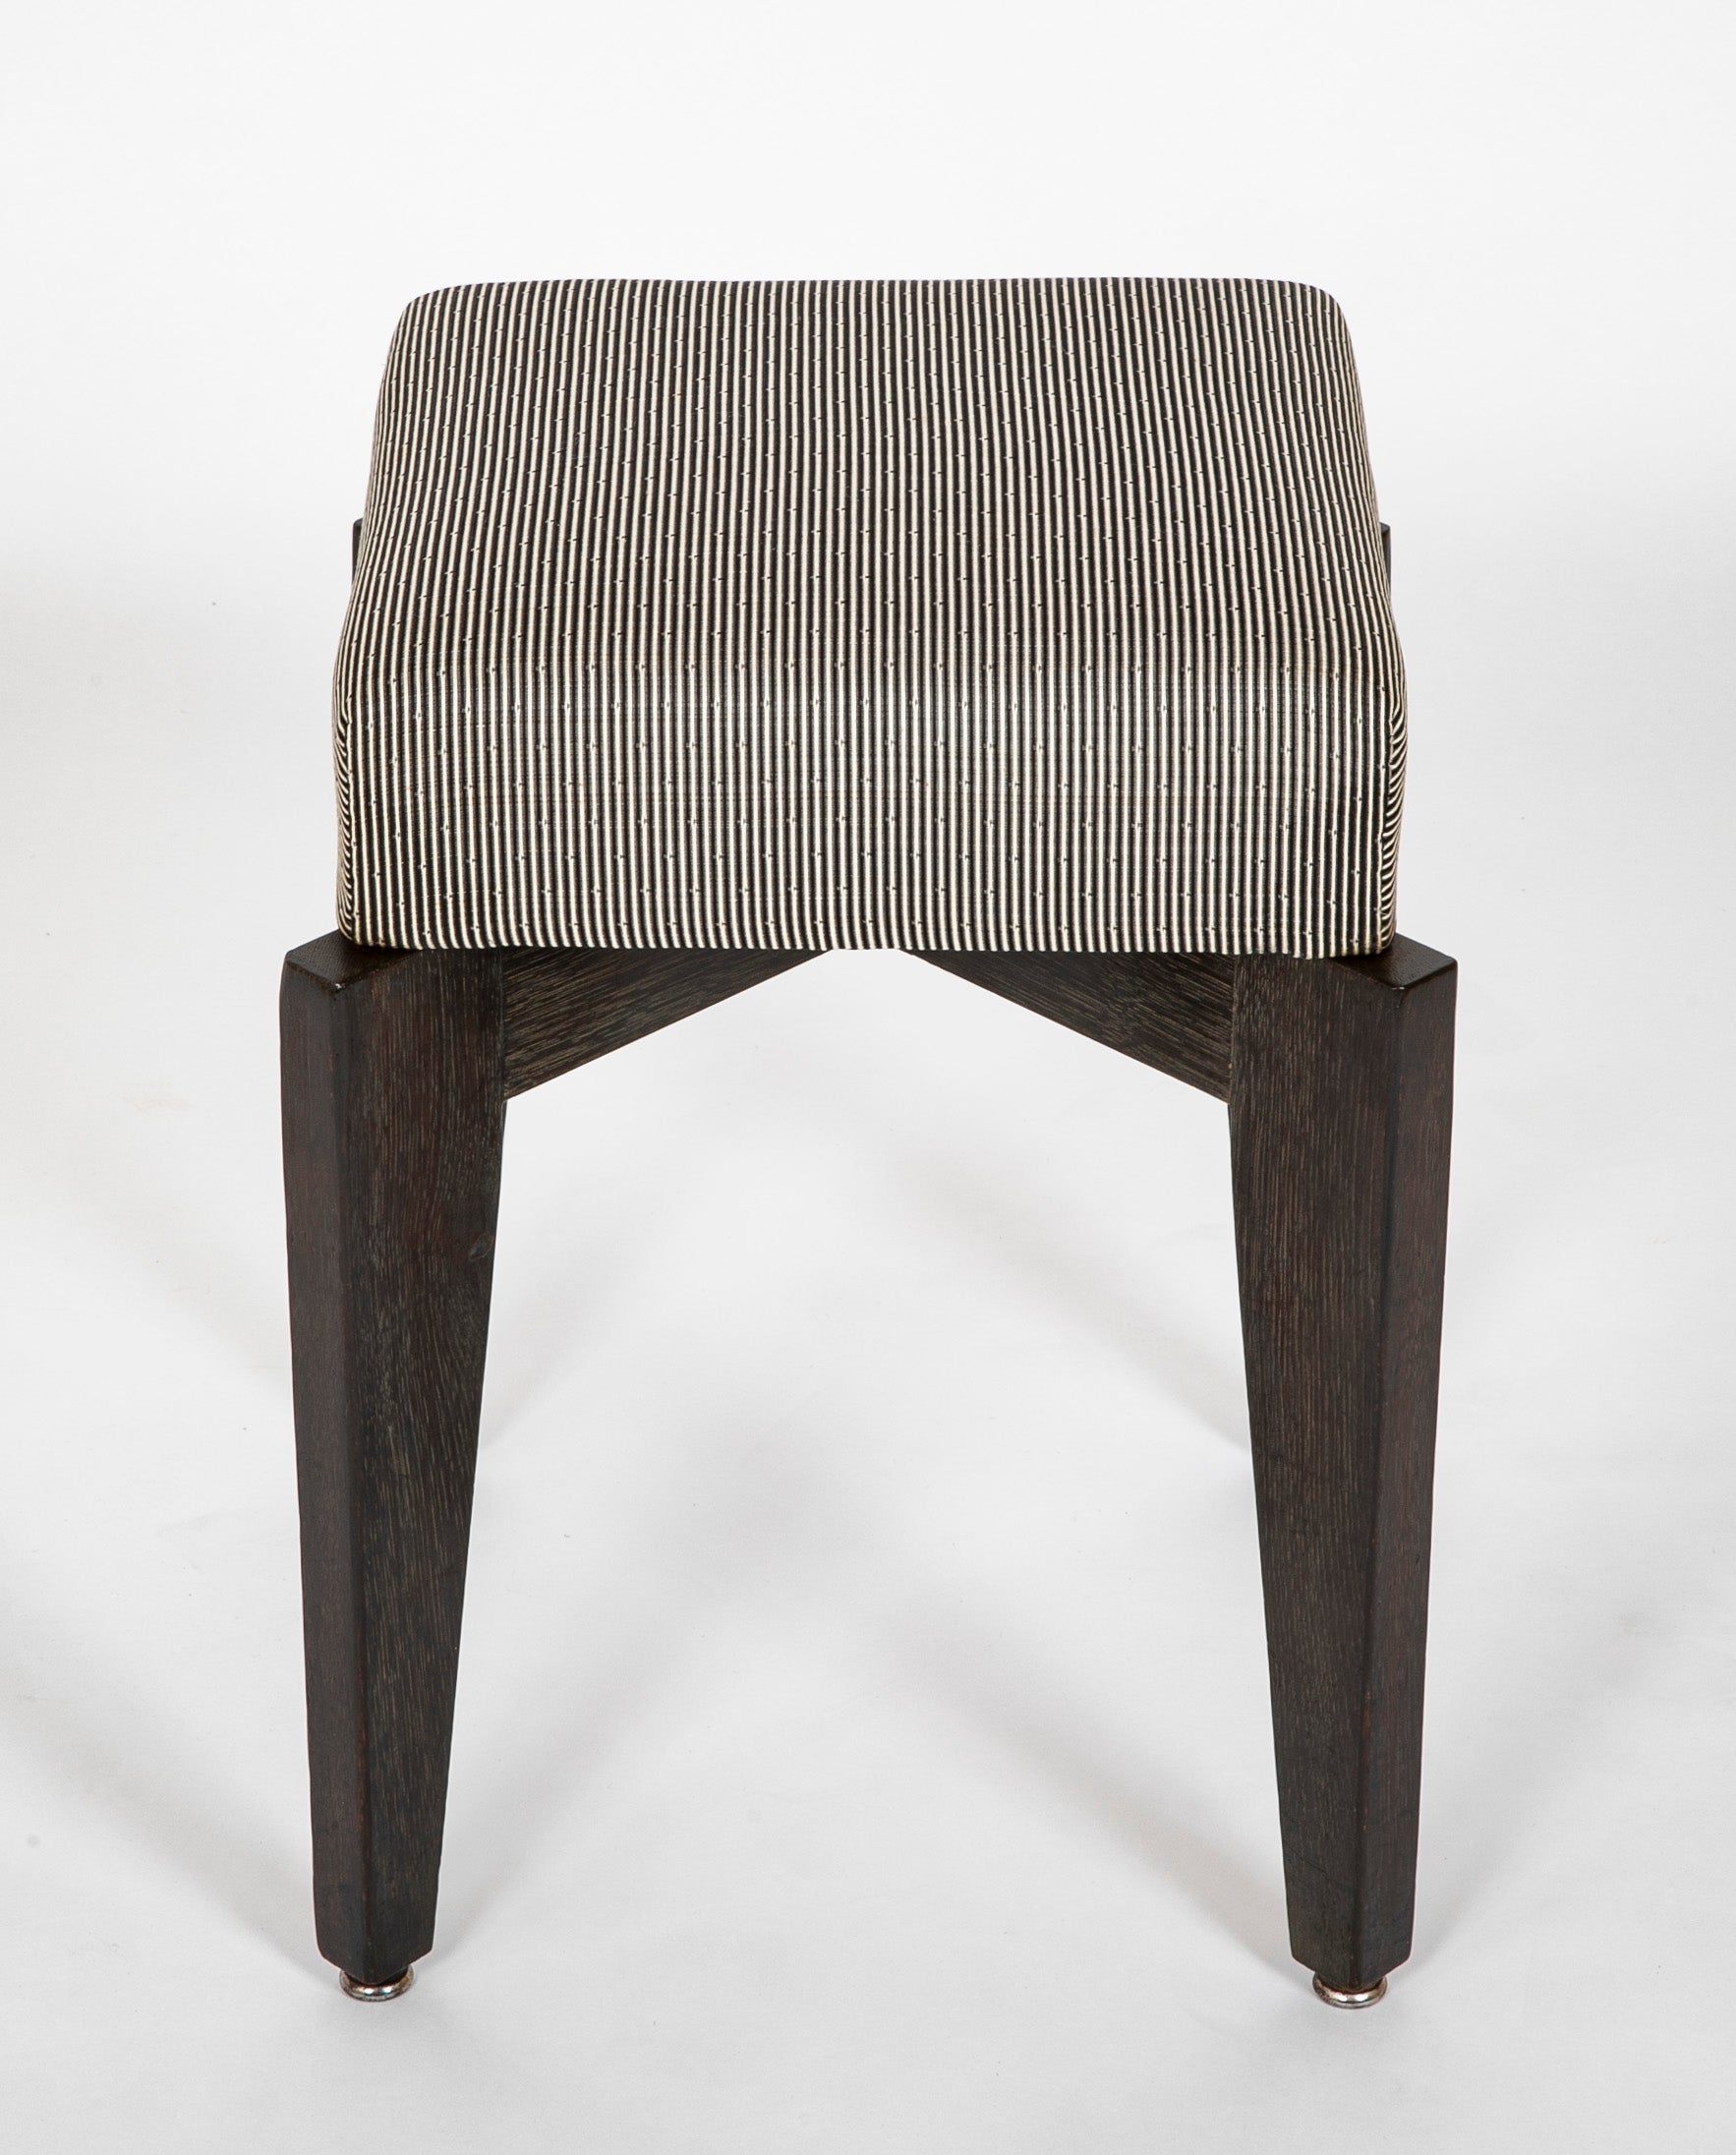 A Cerused Oak Stool by Andre Sornay